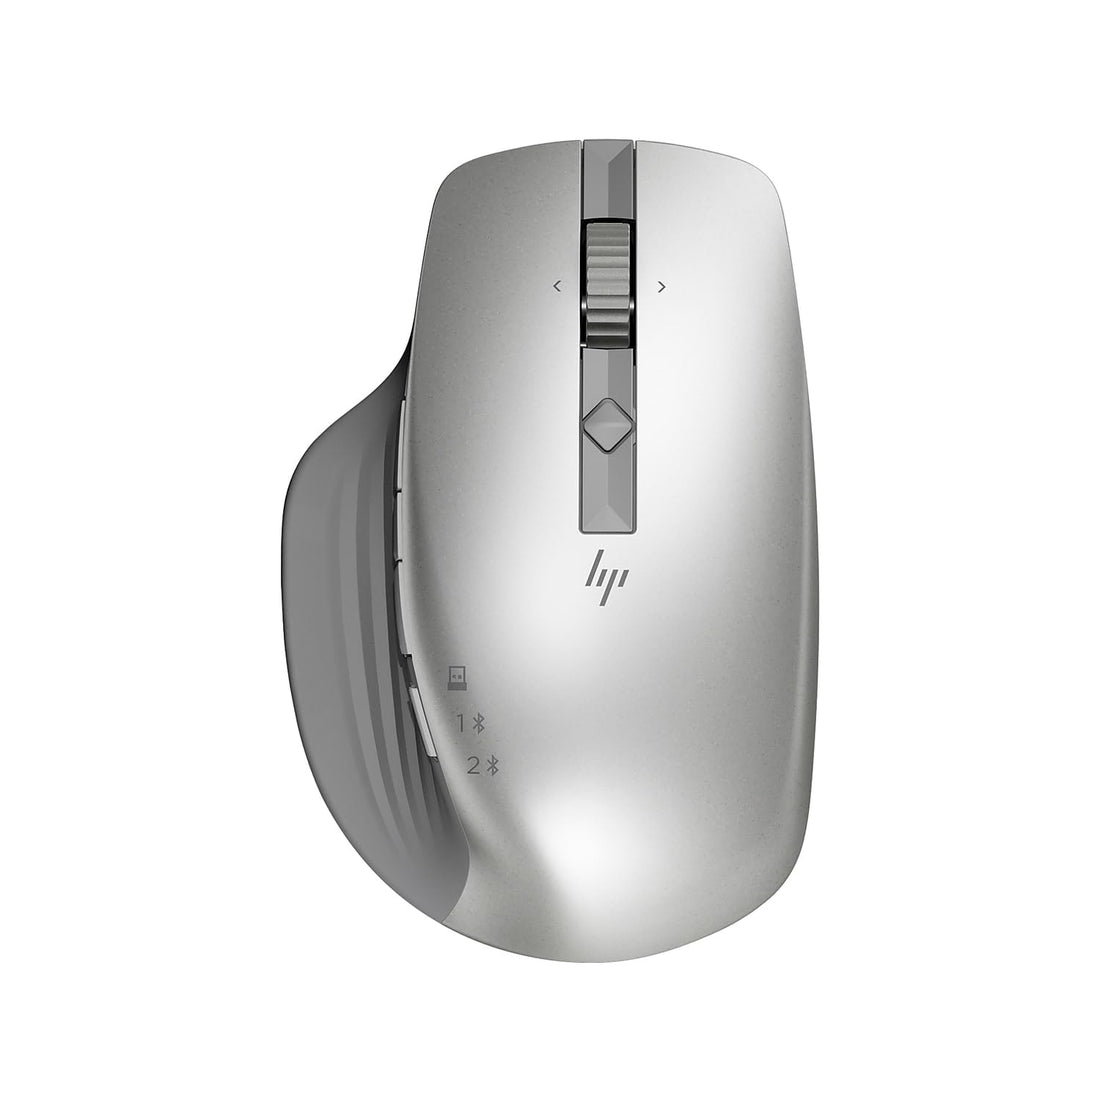 HP 930 Creator Wireless Mouse - Bluetooth or Wired Compatible with USB-A Dongle - 7 Programmable Buttons - Ergonomic Grip - Quiet Click and Scroll - Battery Life Up to 12 Weeks - Track-on-Glass Sensor